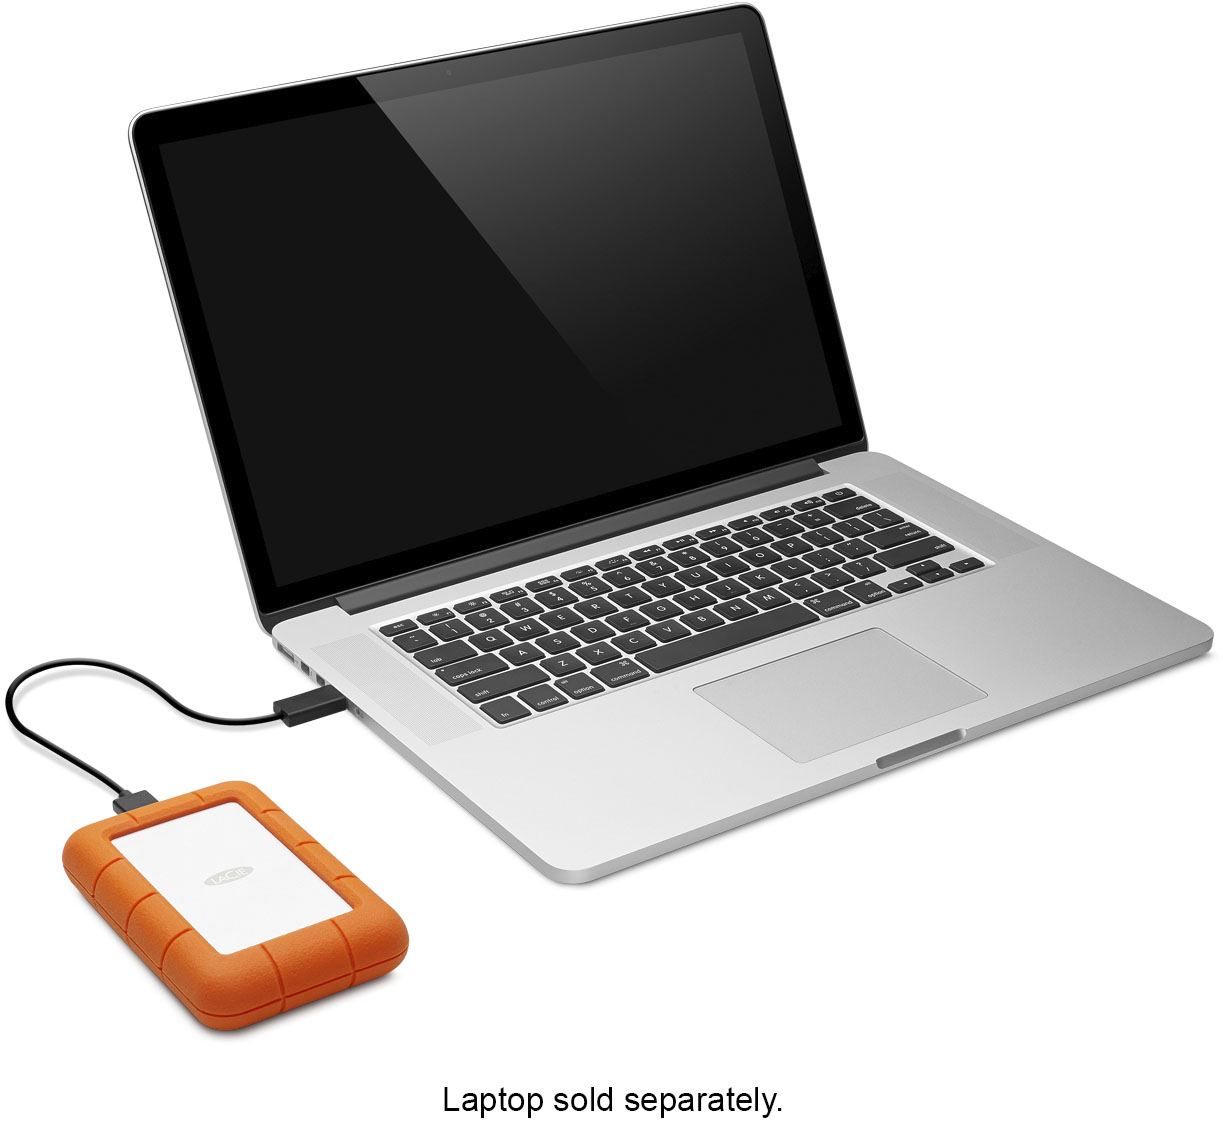 LaCie Rugged Mini 1TB External USB 3.0 Portable Hard Drive with Rescue Data  Recovery Services Orange/Silver LAC301558 - Best Buy